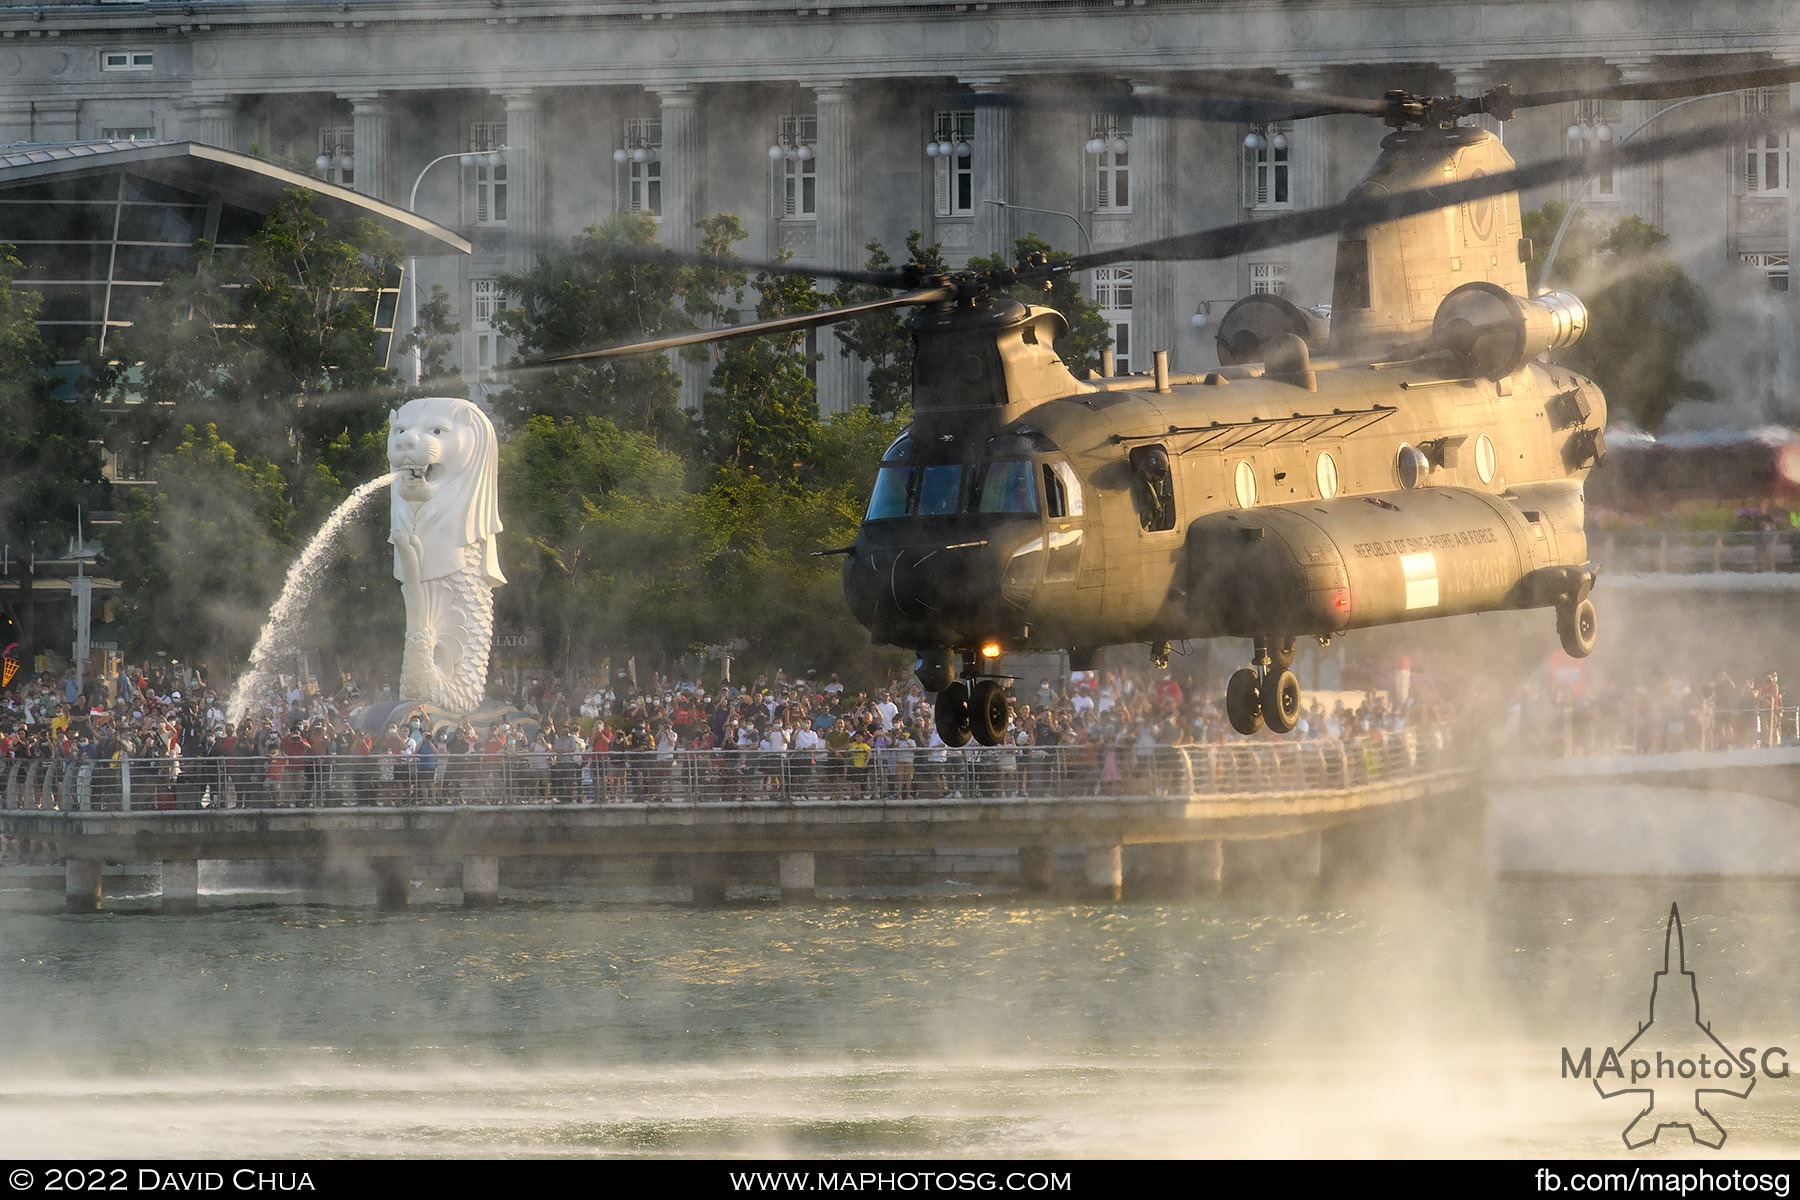 The crowd at Merlion Park looks on as the Chinook prepares to deploy Navy divers